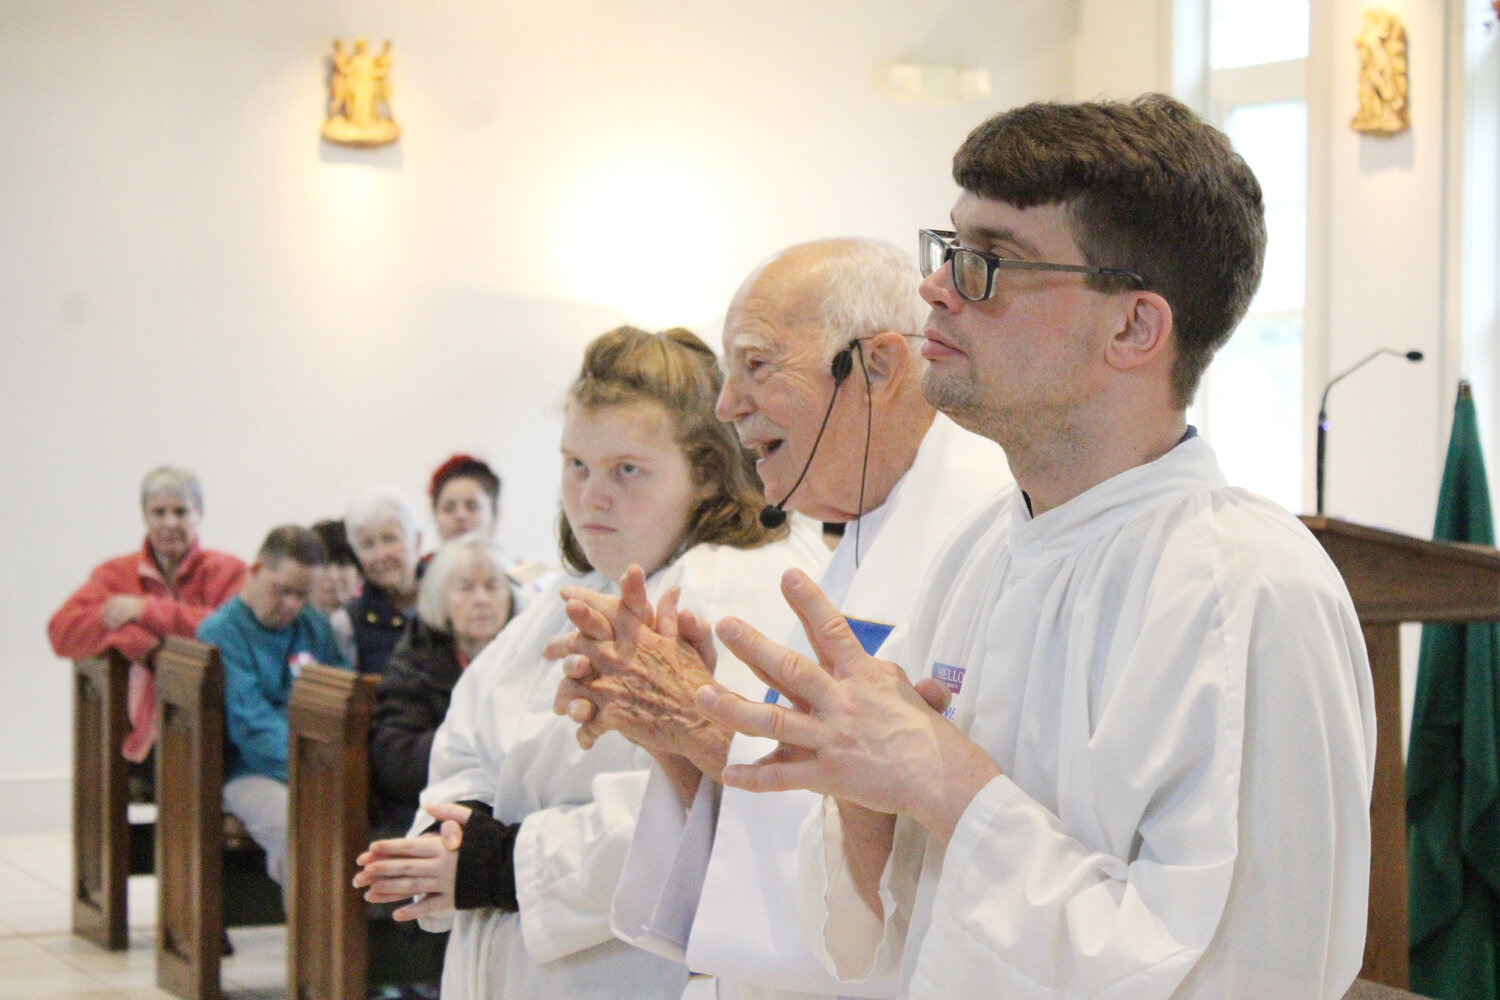 Rachel Gederman and Stephen McNamara assist Msgr. Gerard Sabourin during the annual SPRED Mass at St. Kateri Tekakwitha Catholic Church, Exeter. The Special Religious Education (SPRED) Office of the Diocese of Providence helps parishes in Rhode Island better serve those parishioners with intellectual and developmental disabilities. SPRED responds to the needs of individuals on the Autism spectrum, Down syndrome, cerebral palsy and seizure disorders, as well as people with other diagnoses.